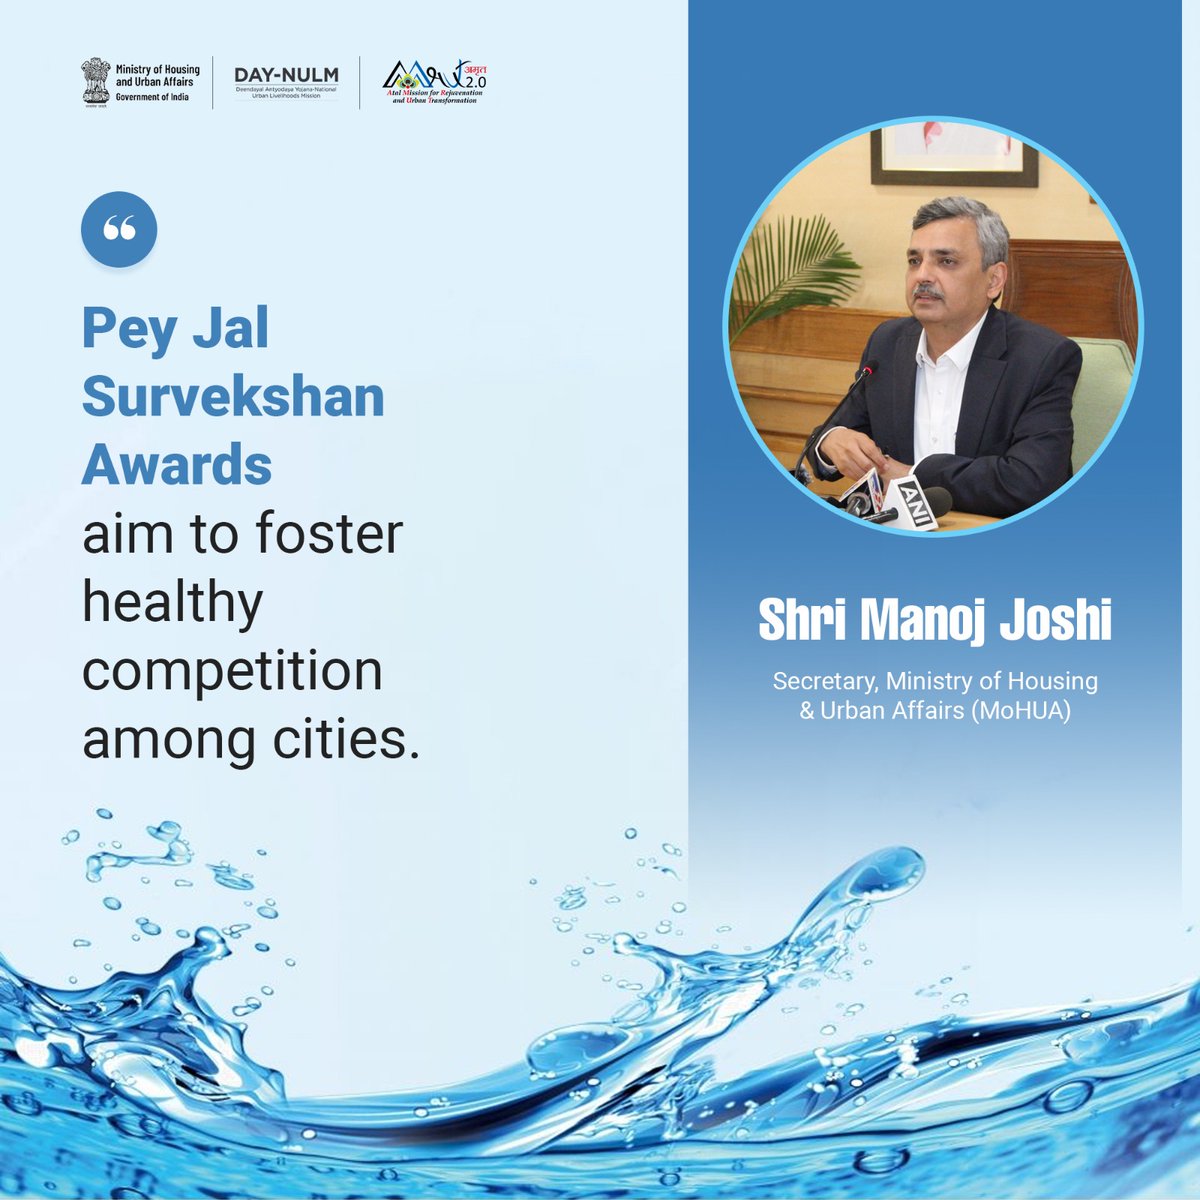 #PeyJalSurvekshanAwards ignites a spirit of excellence and innovation in water management across cities. As part of the AMRUT 2.0 mission, Pey Jal Survekshan evaluates vital aspects like water supply quality, sewage management, and conservation efforts. 

#AMRUT #PeyJal